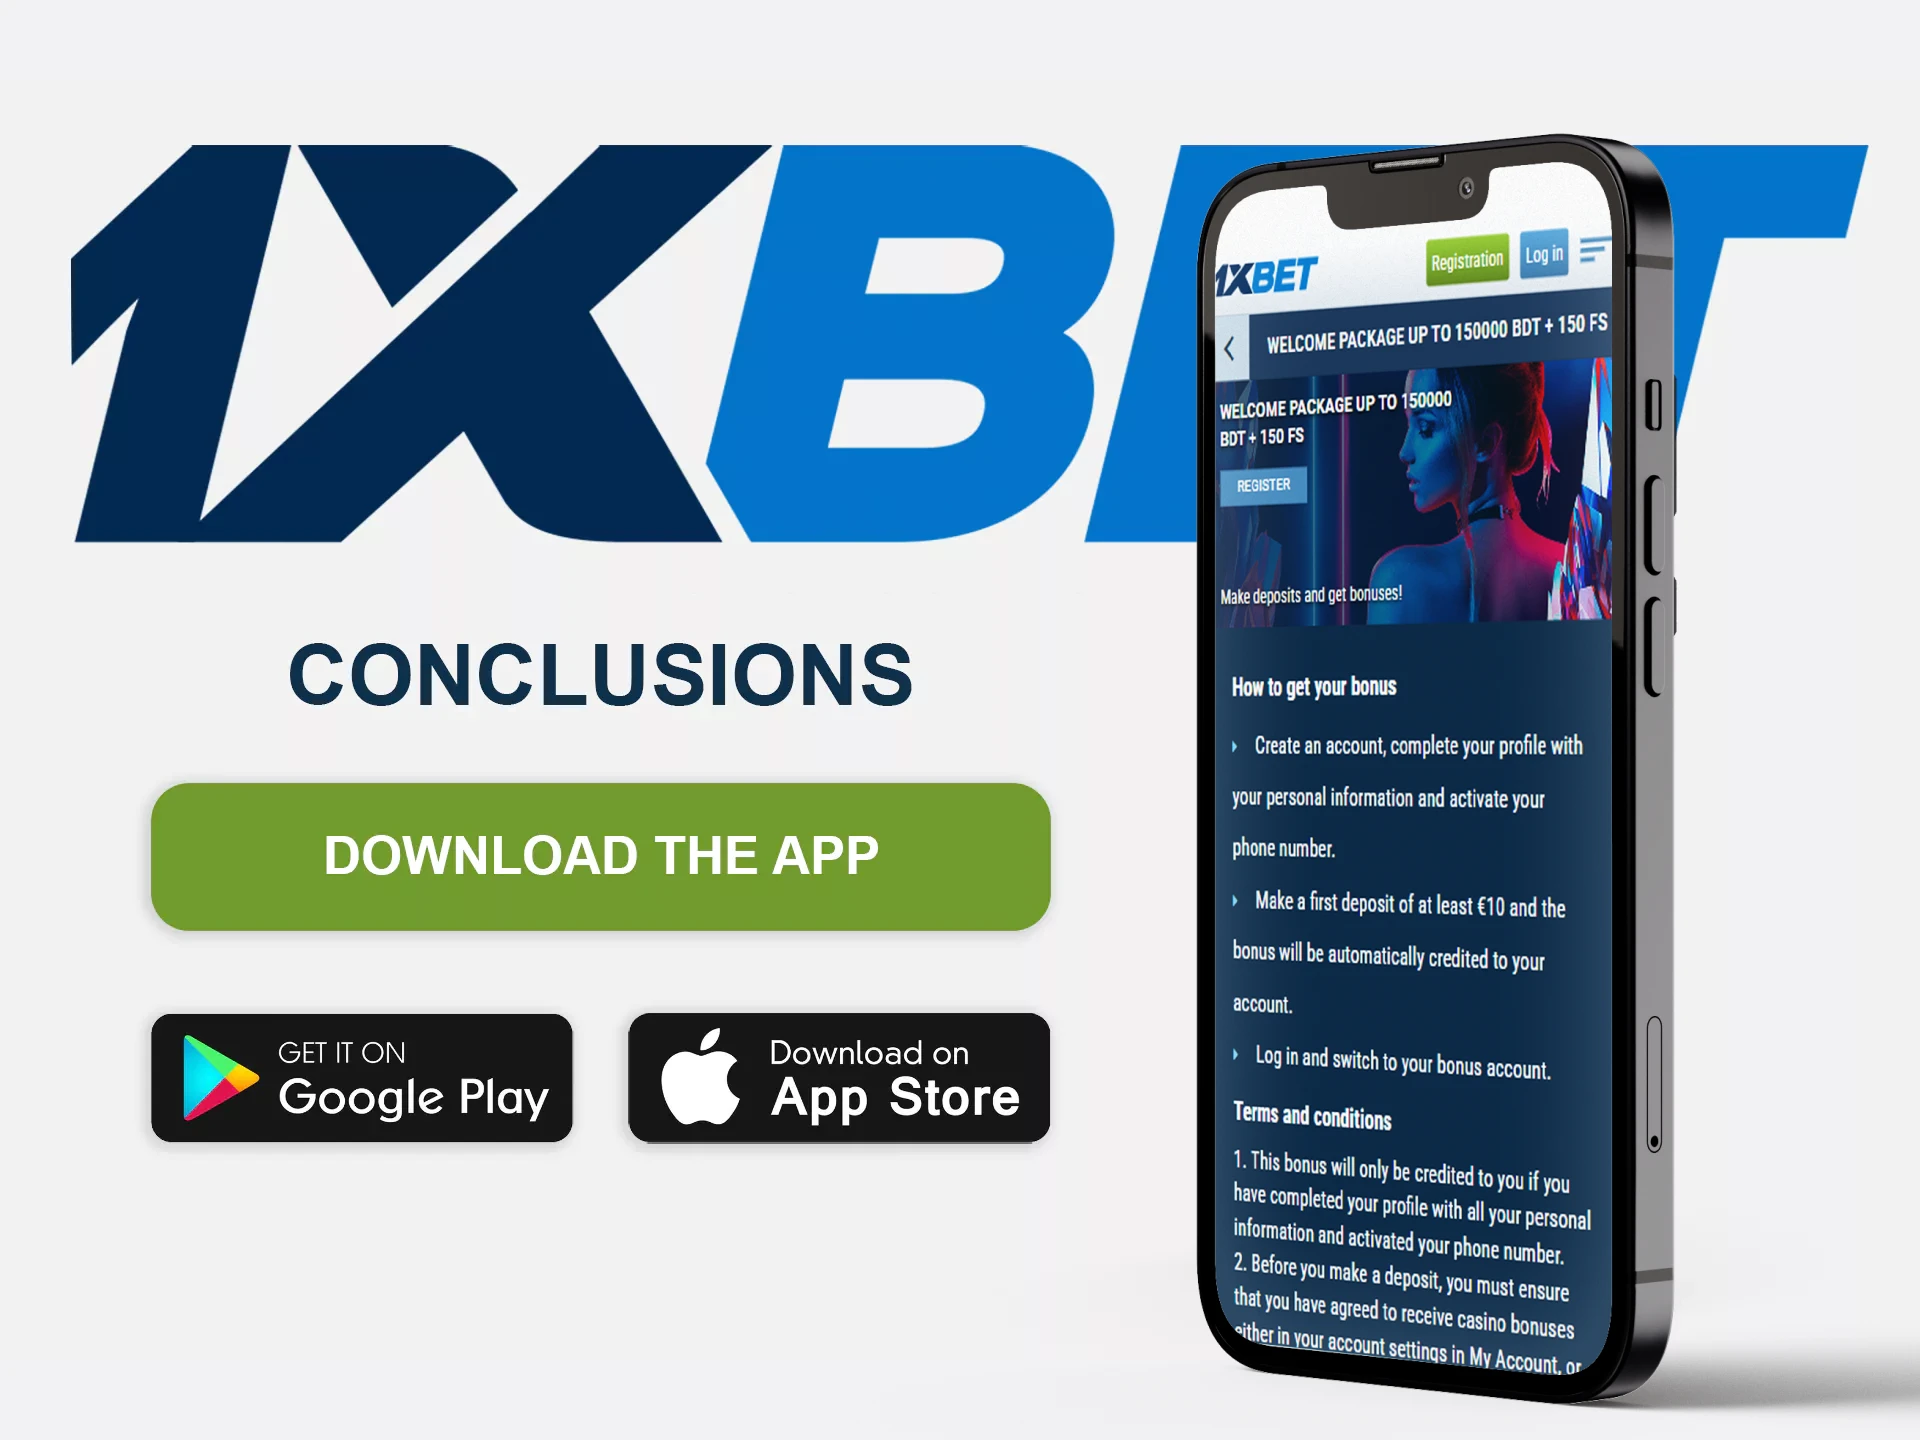 10 Things You Have In Common With 1xBet Vietnam